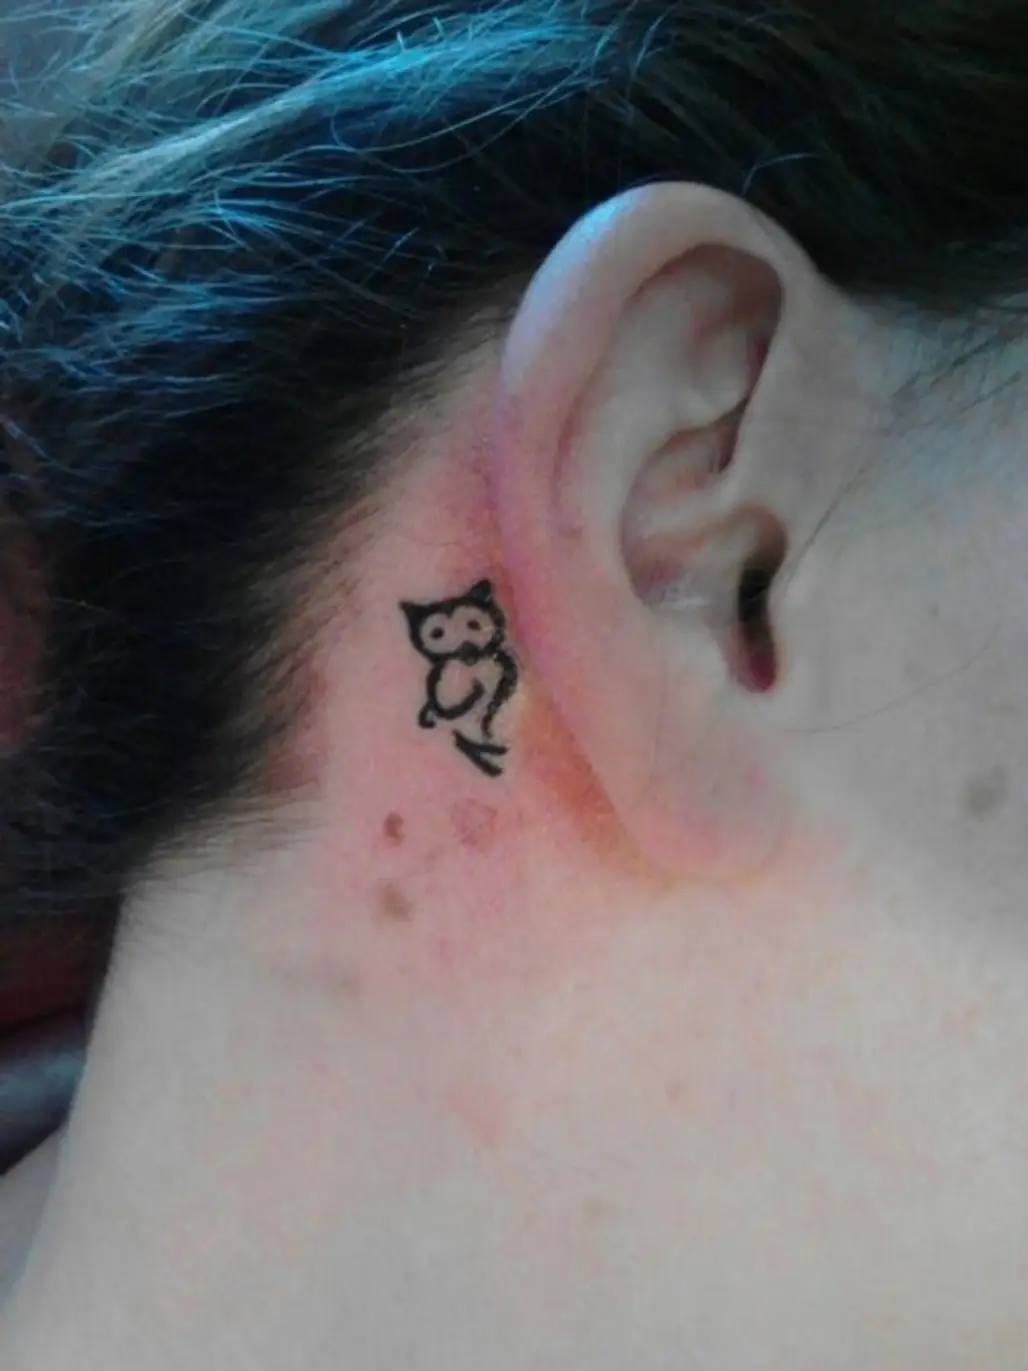 Single needle tribal tattoo located on the neck.